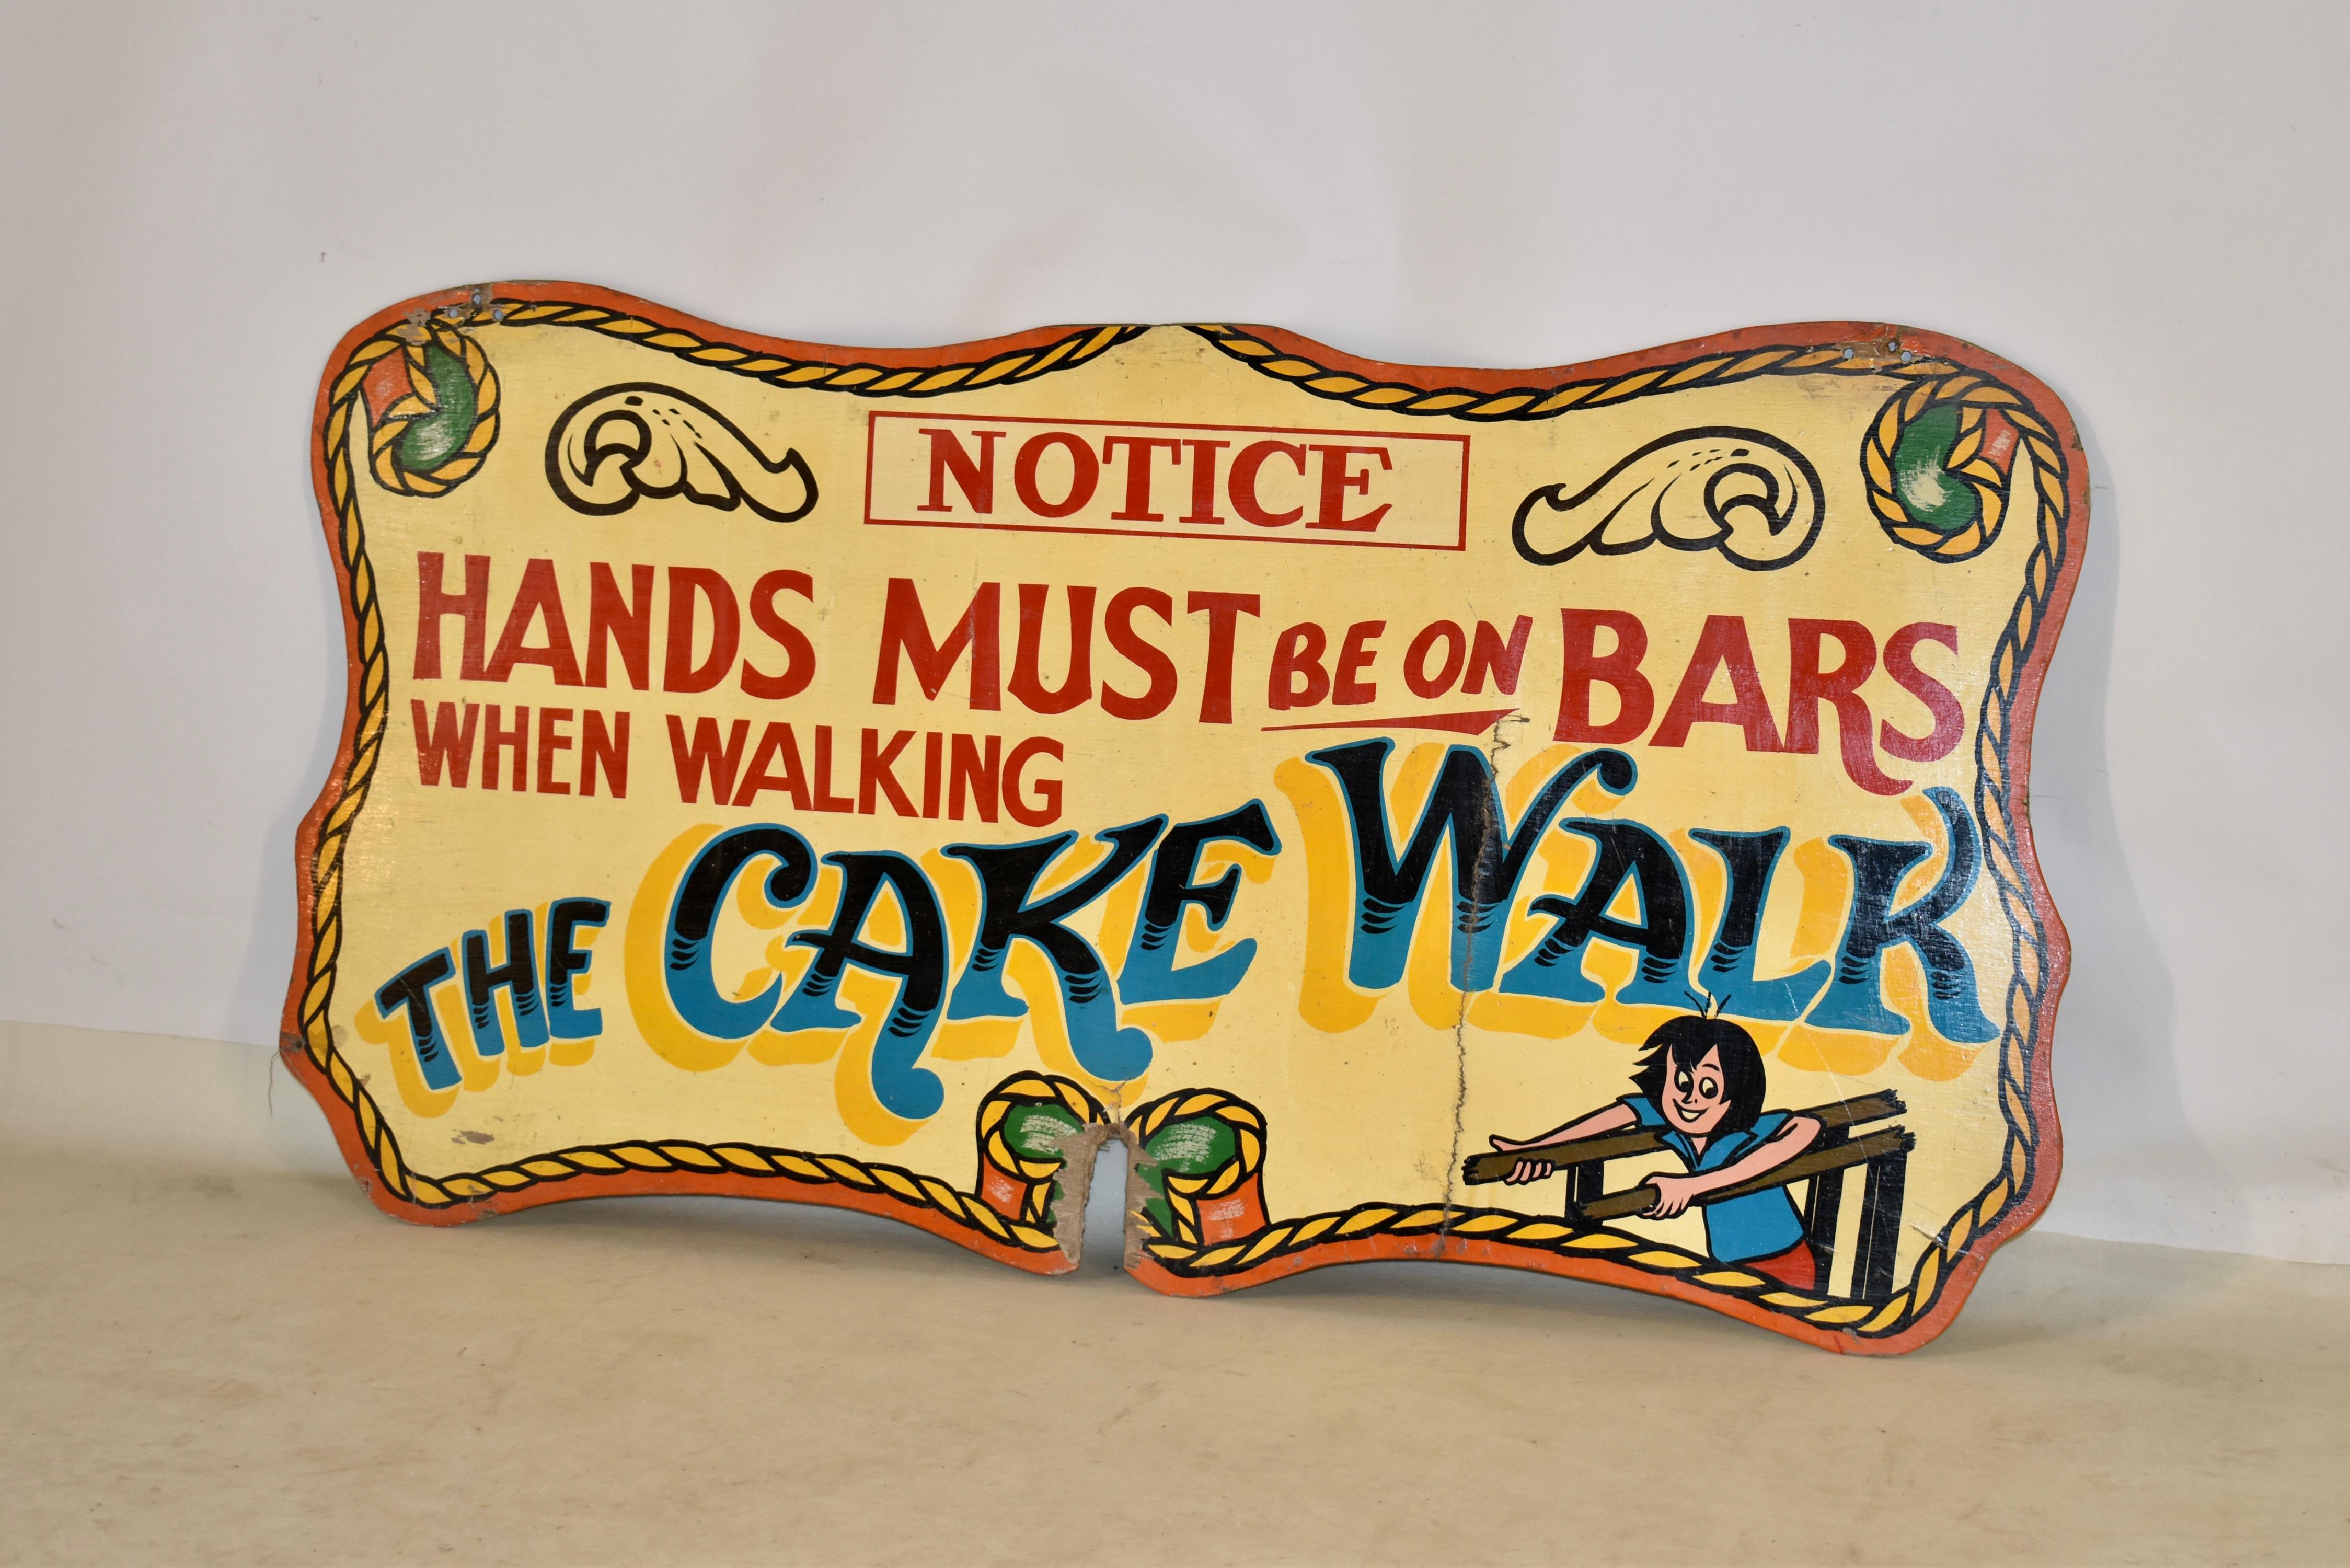 1960s carnival art sign from England. It is advertising a cake walk on one side of the sign, and on the back has a charming message 